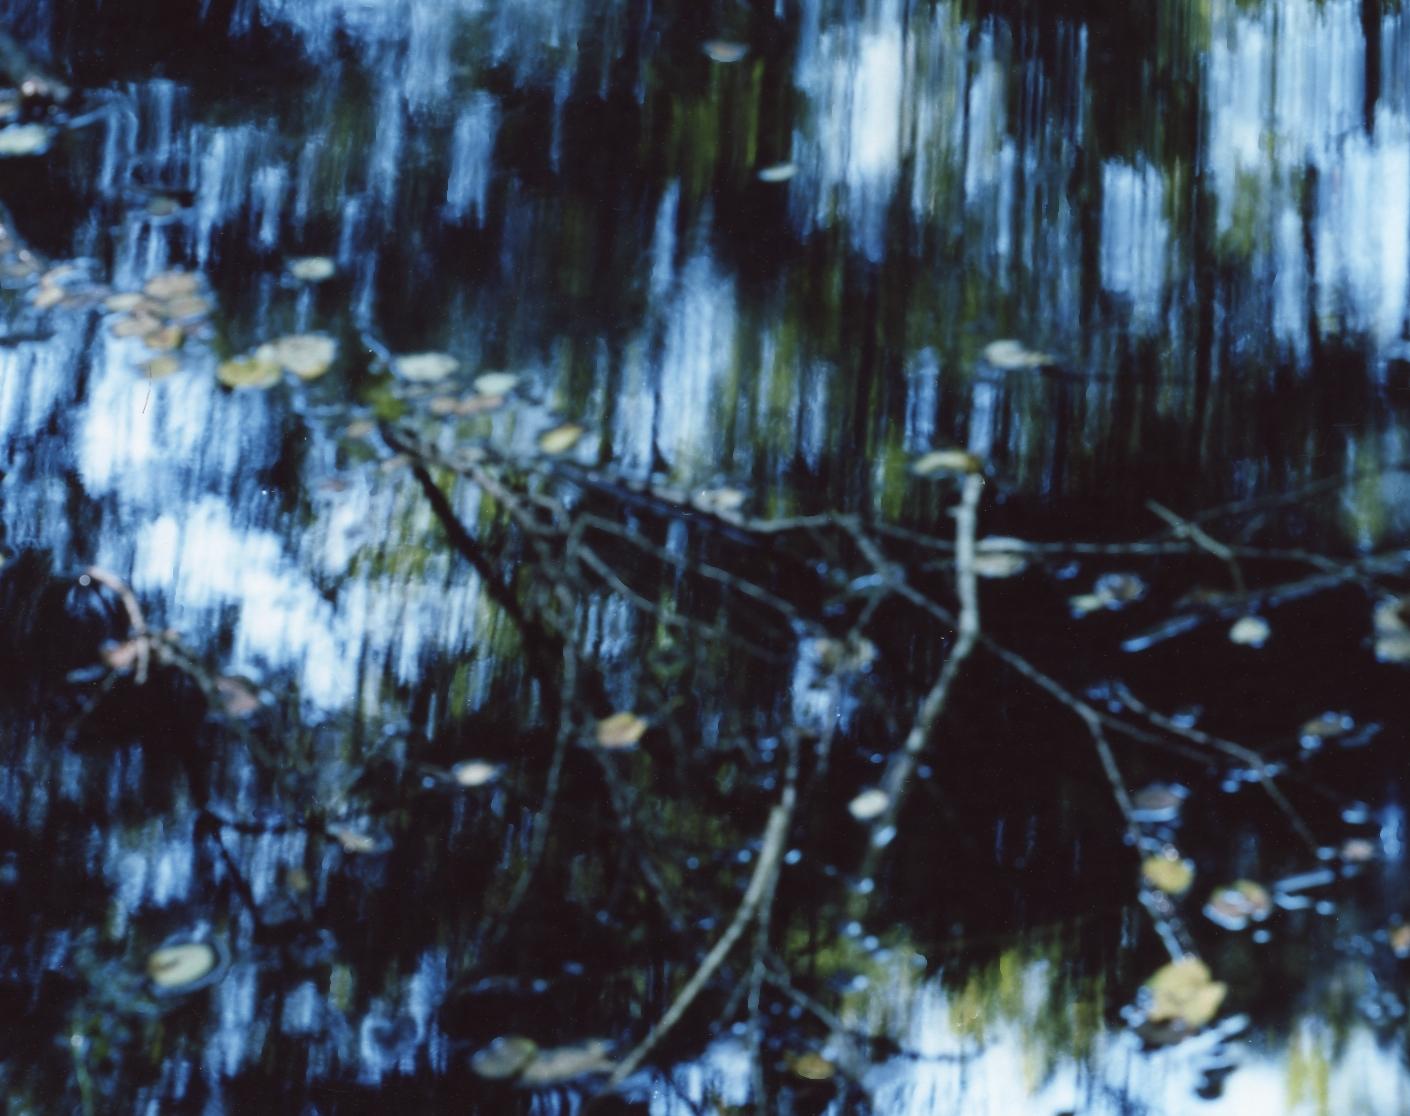 RISAKU SUZUKI (*1963, Japan)
Water Mirror 14,WM-75
2014
Chromogenic print
Sheet 120 x 155 cm (47 1/4 x 61 in.)
Edition of 5; Ed. no. 5/5 (last available edition)
Framed

‘Water Mirror’is a condensation of all that makes Suzuki’s photography so